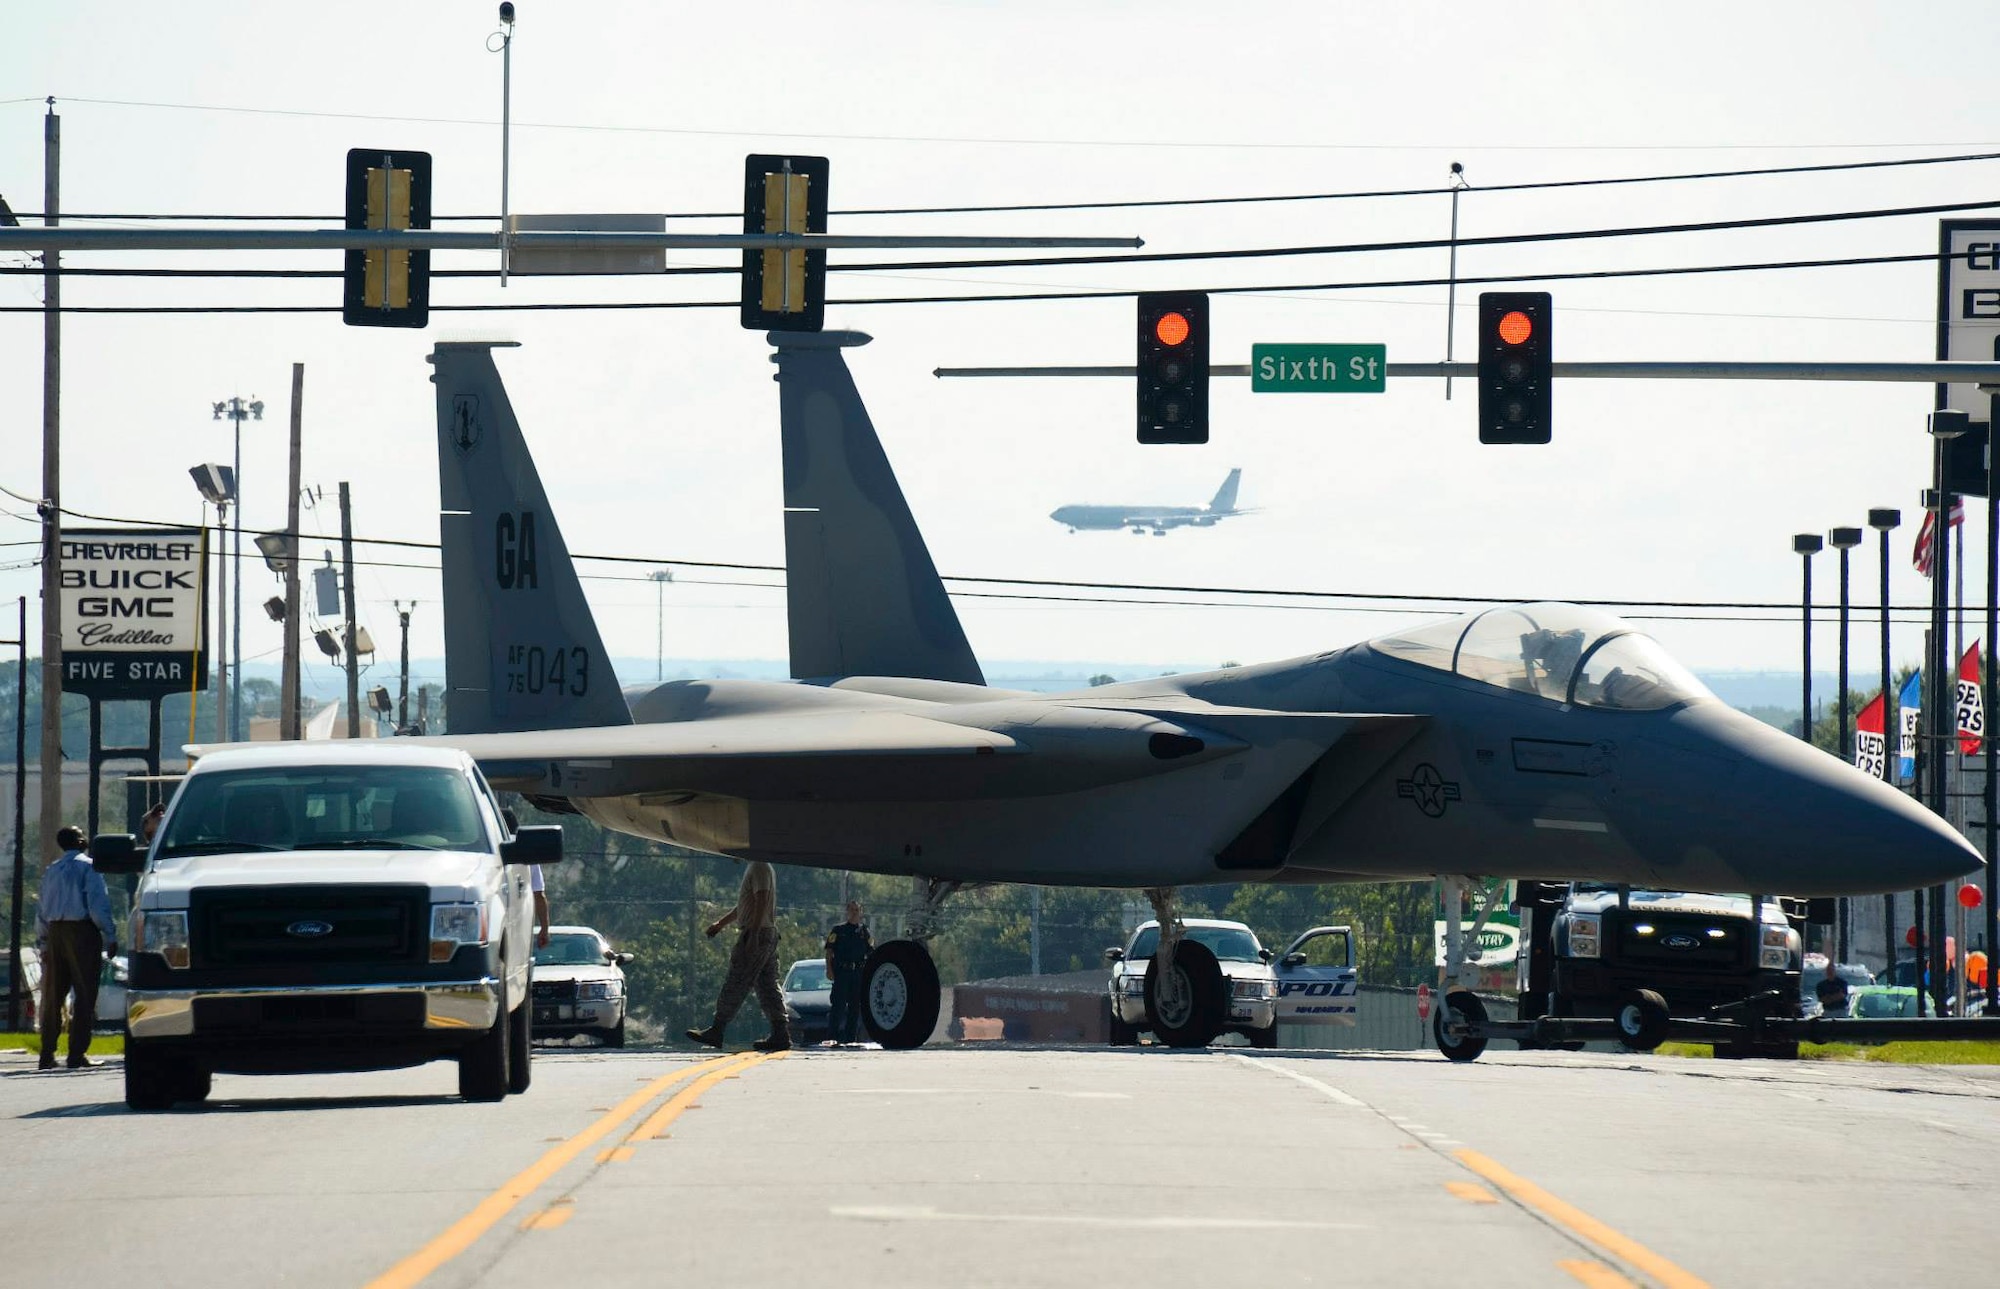 Airmen maneuver through traffic lights while towing an F-15 Eagle down Watson Boulevard to the Warner Robins City Hall, Warner Robins, Ga. Sept. 6, 2014. The aircraft was loaned to the city by the Georgia Air National Guard’s 116th Air Control Wing to serve as a static display for a new veteran’s memorial. The Airmen moving the aircraft are assigned to the 116th Maintenance Group. (U.S. Air National Guard photo/Tech. Sgt. Regina Young)   